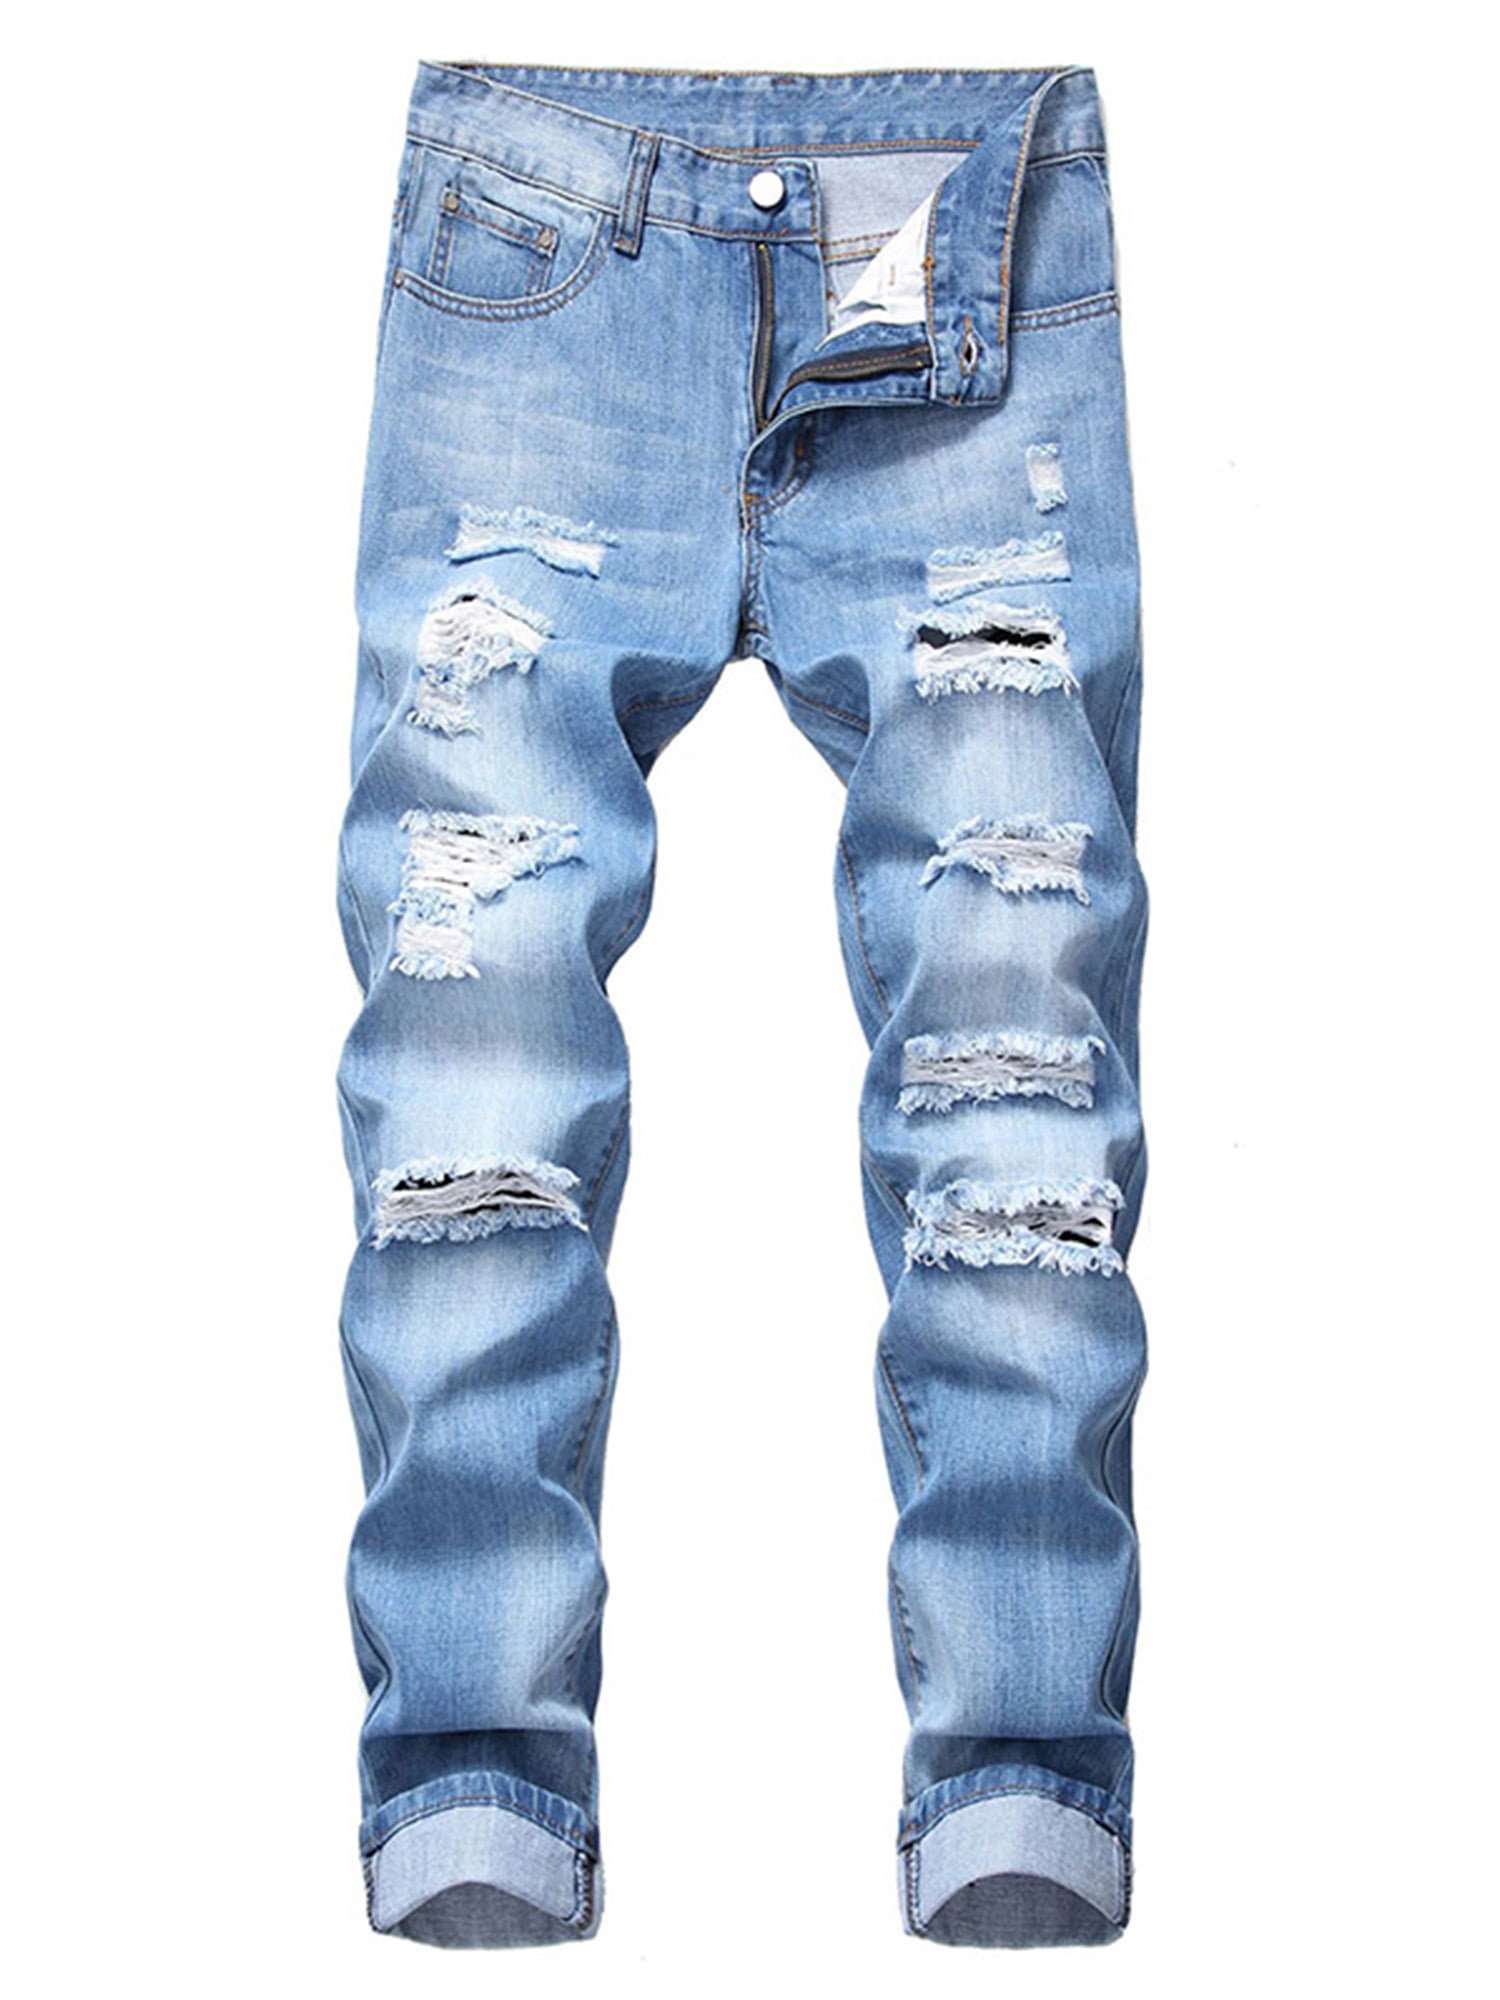 Details about   Men's skinny ripped jeans riders make old denim trousers stretch slim trousers